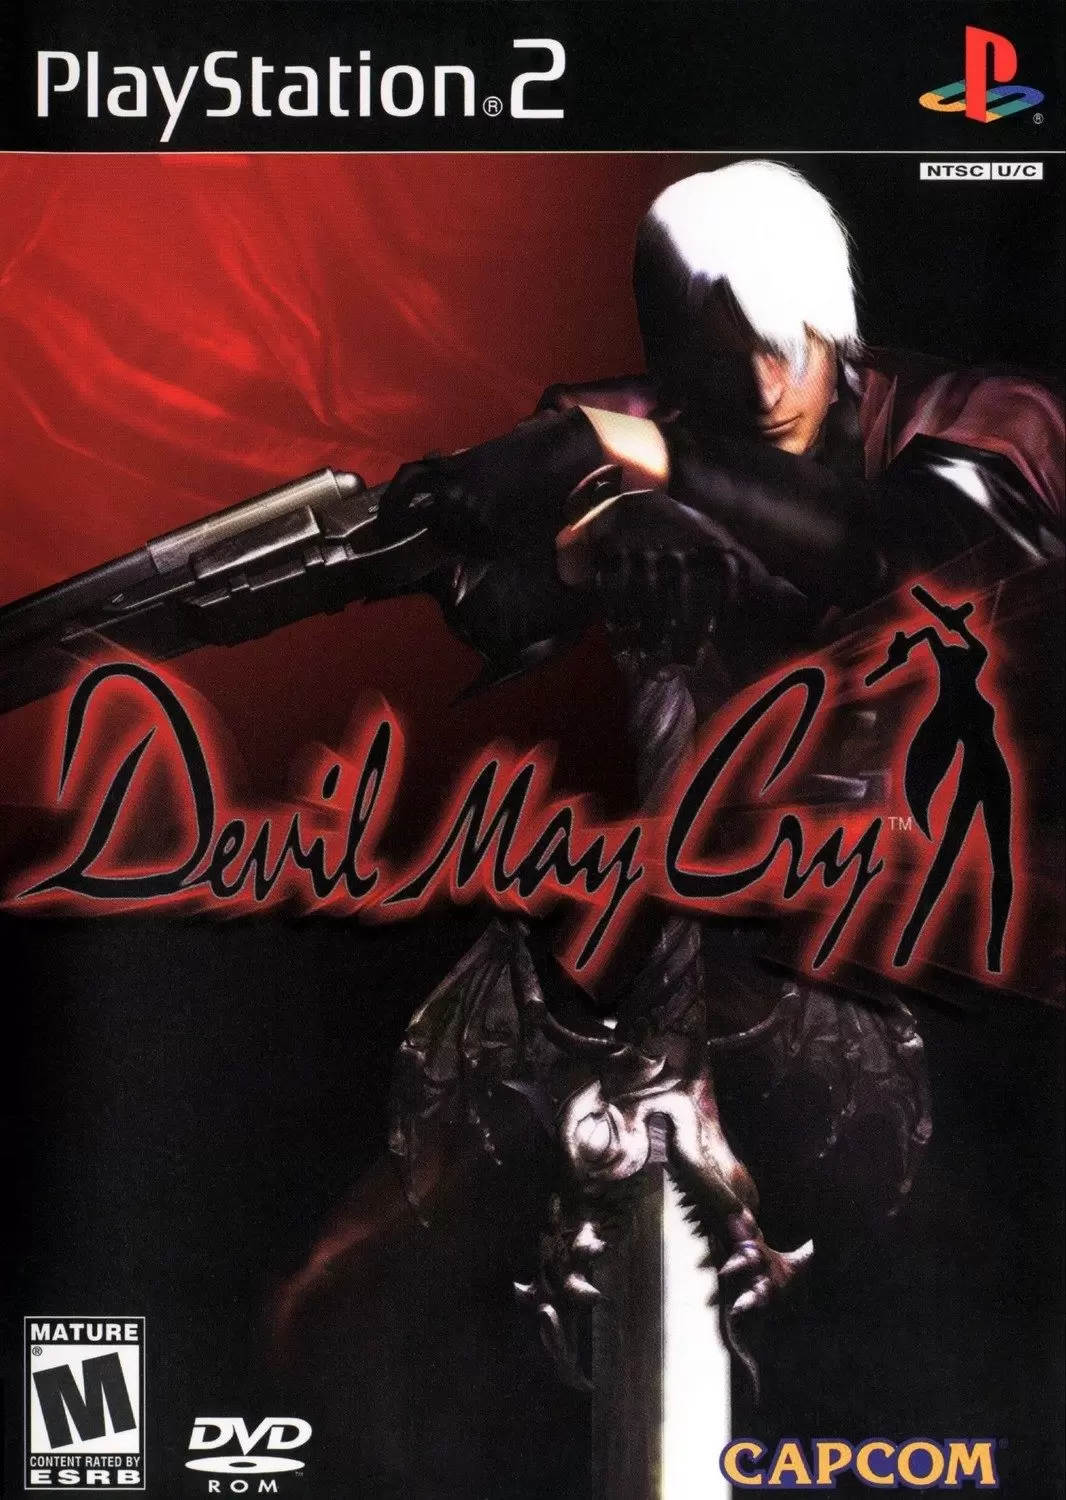 PS2 Games - Devil May Cry